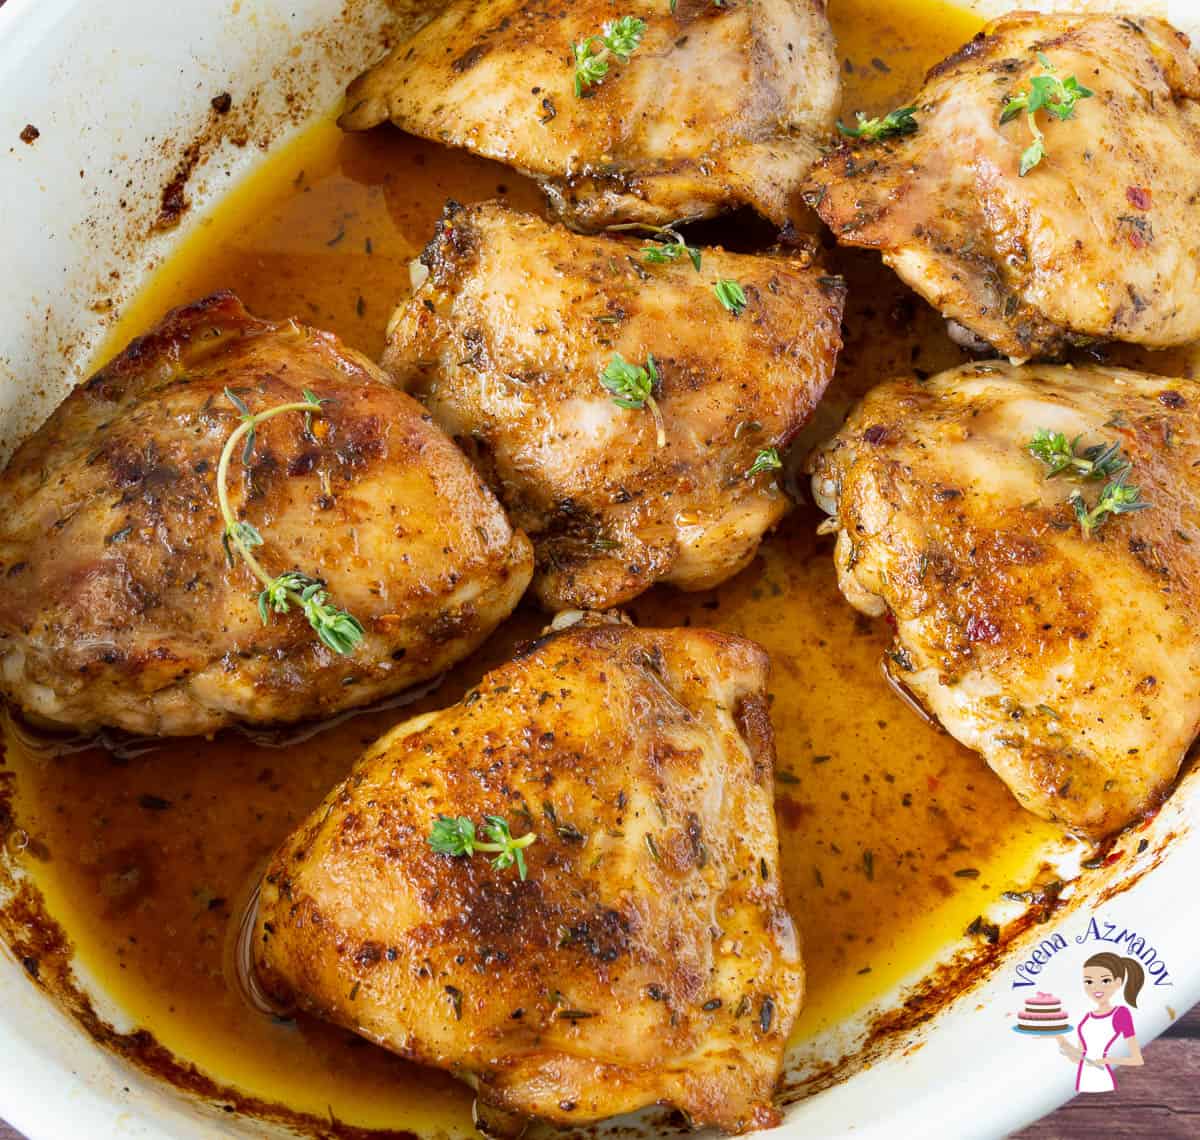 Baked chicken with cajun spice in a ceramic baking dish